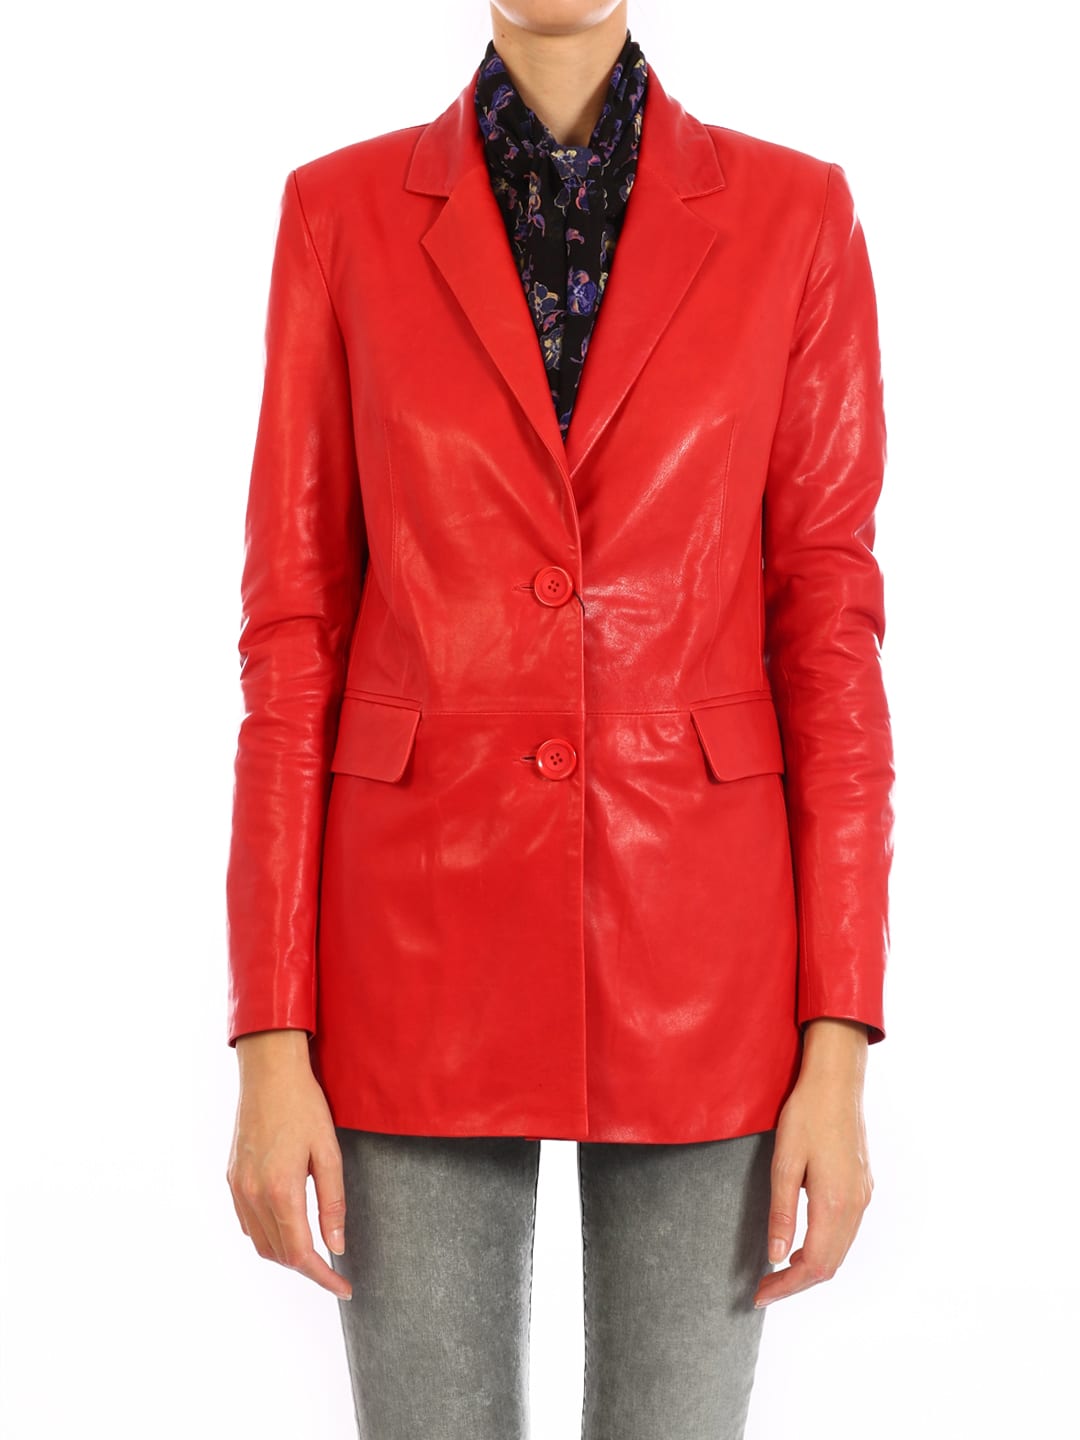 ARMA RED LEATHER JACKET,11286540